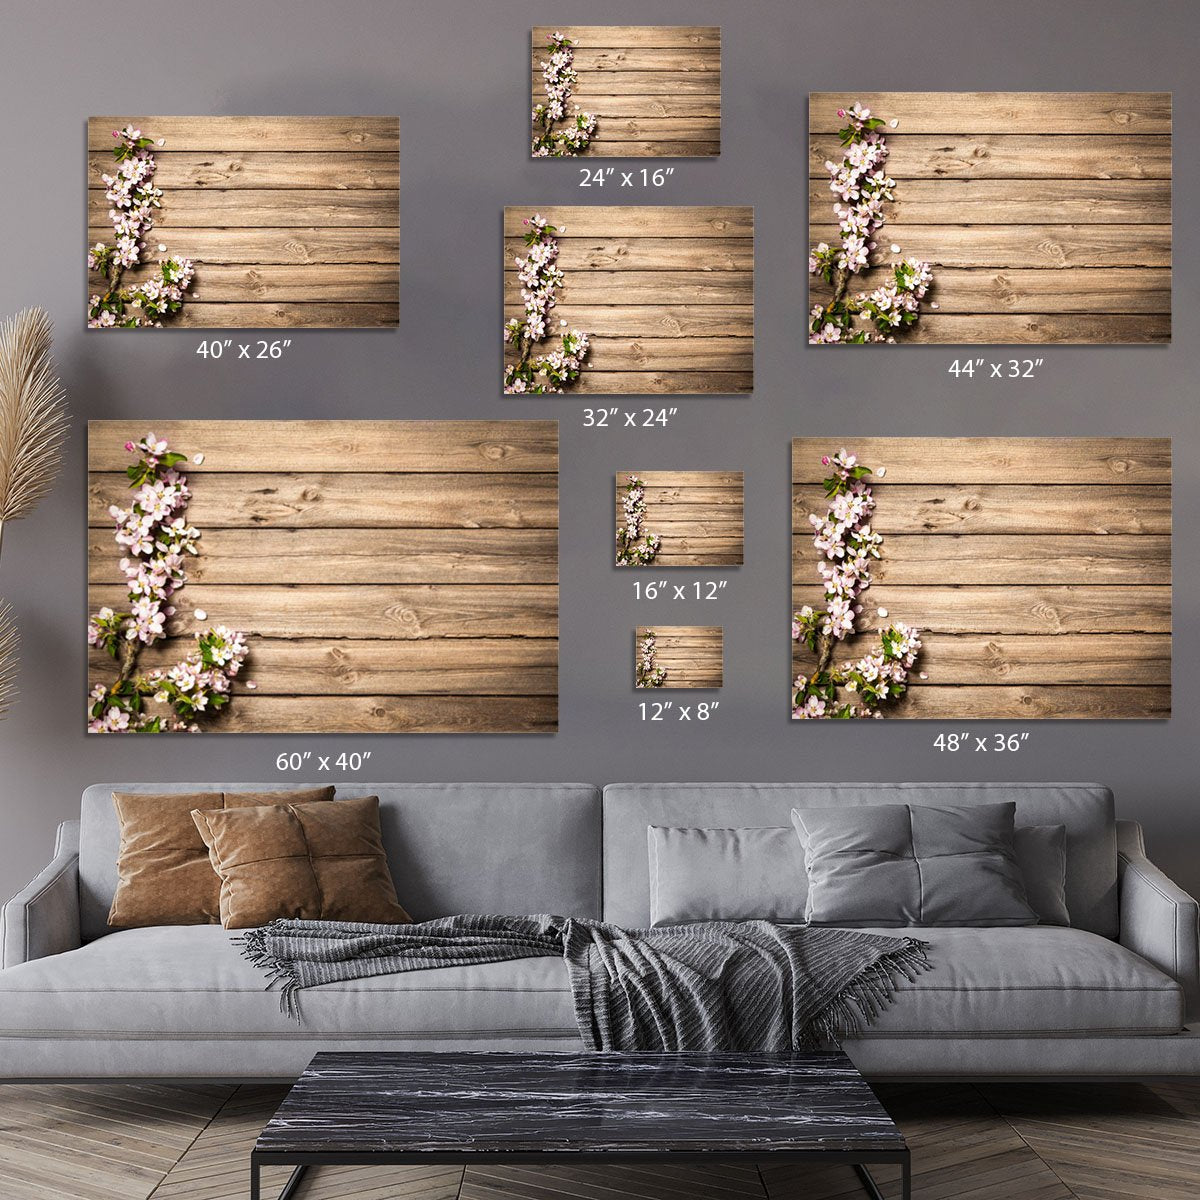 Spring flowering branch on wooden background Canvas Print or Poster